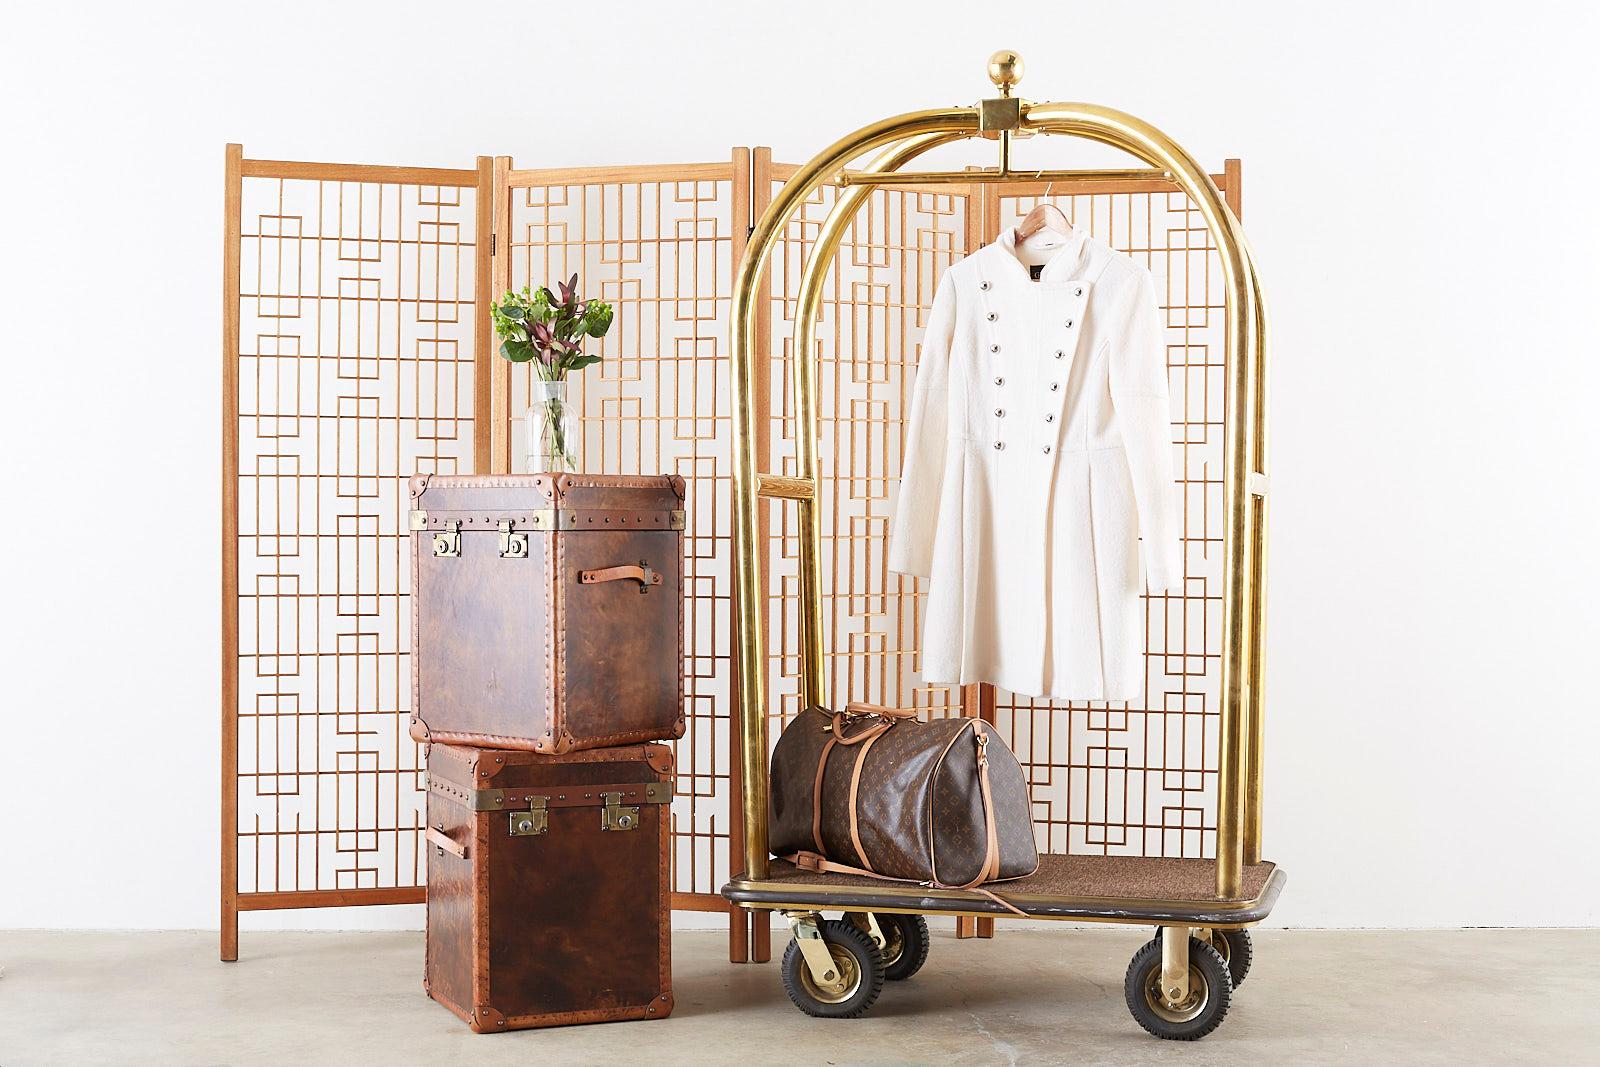 Classic brass bird cage luggage cart or bellman's valet made by the original Forbes Industries in California. Made of thick 2 inch diameter polished solid brass tubes. Steel reinforced deck carpeted with a wrap around bumper. The top of the cart has